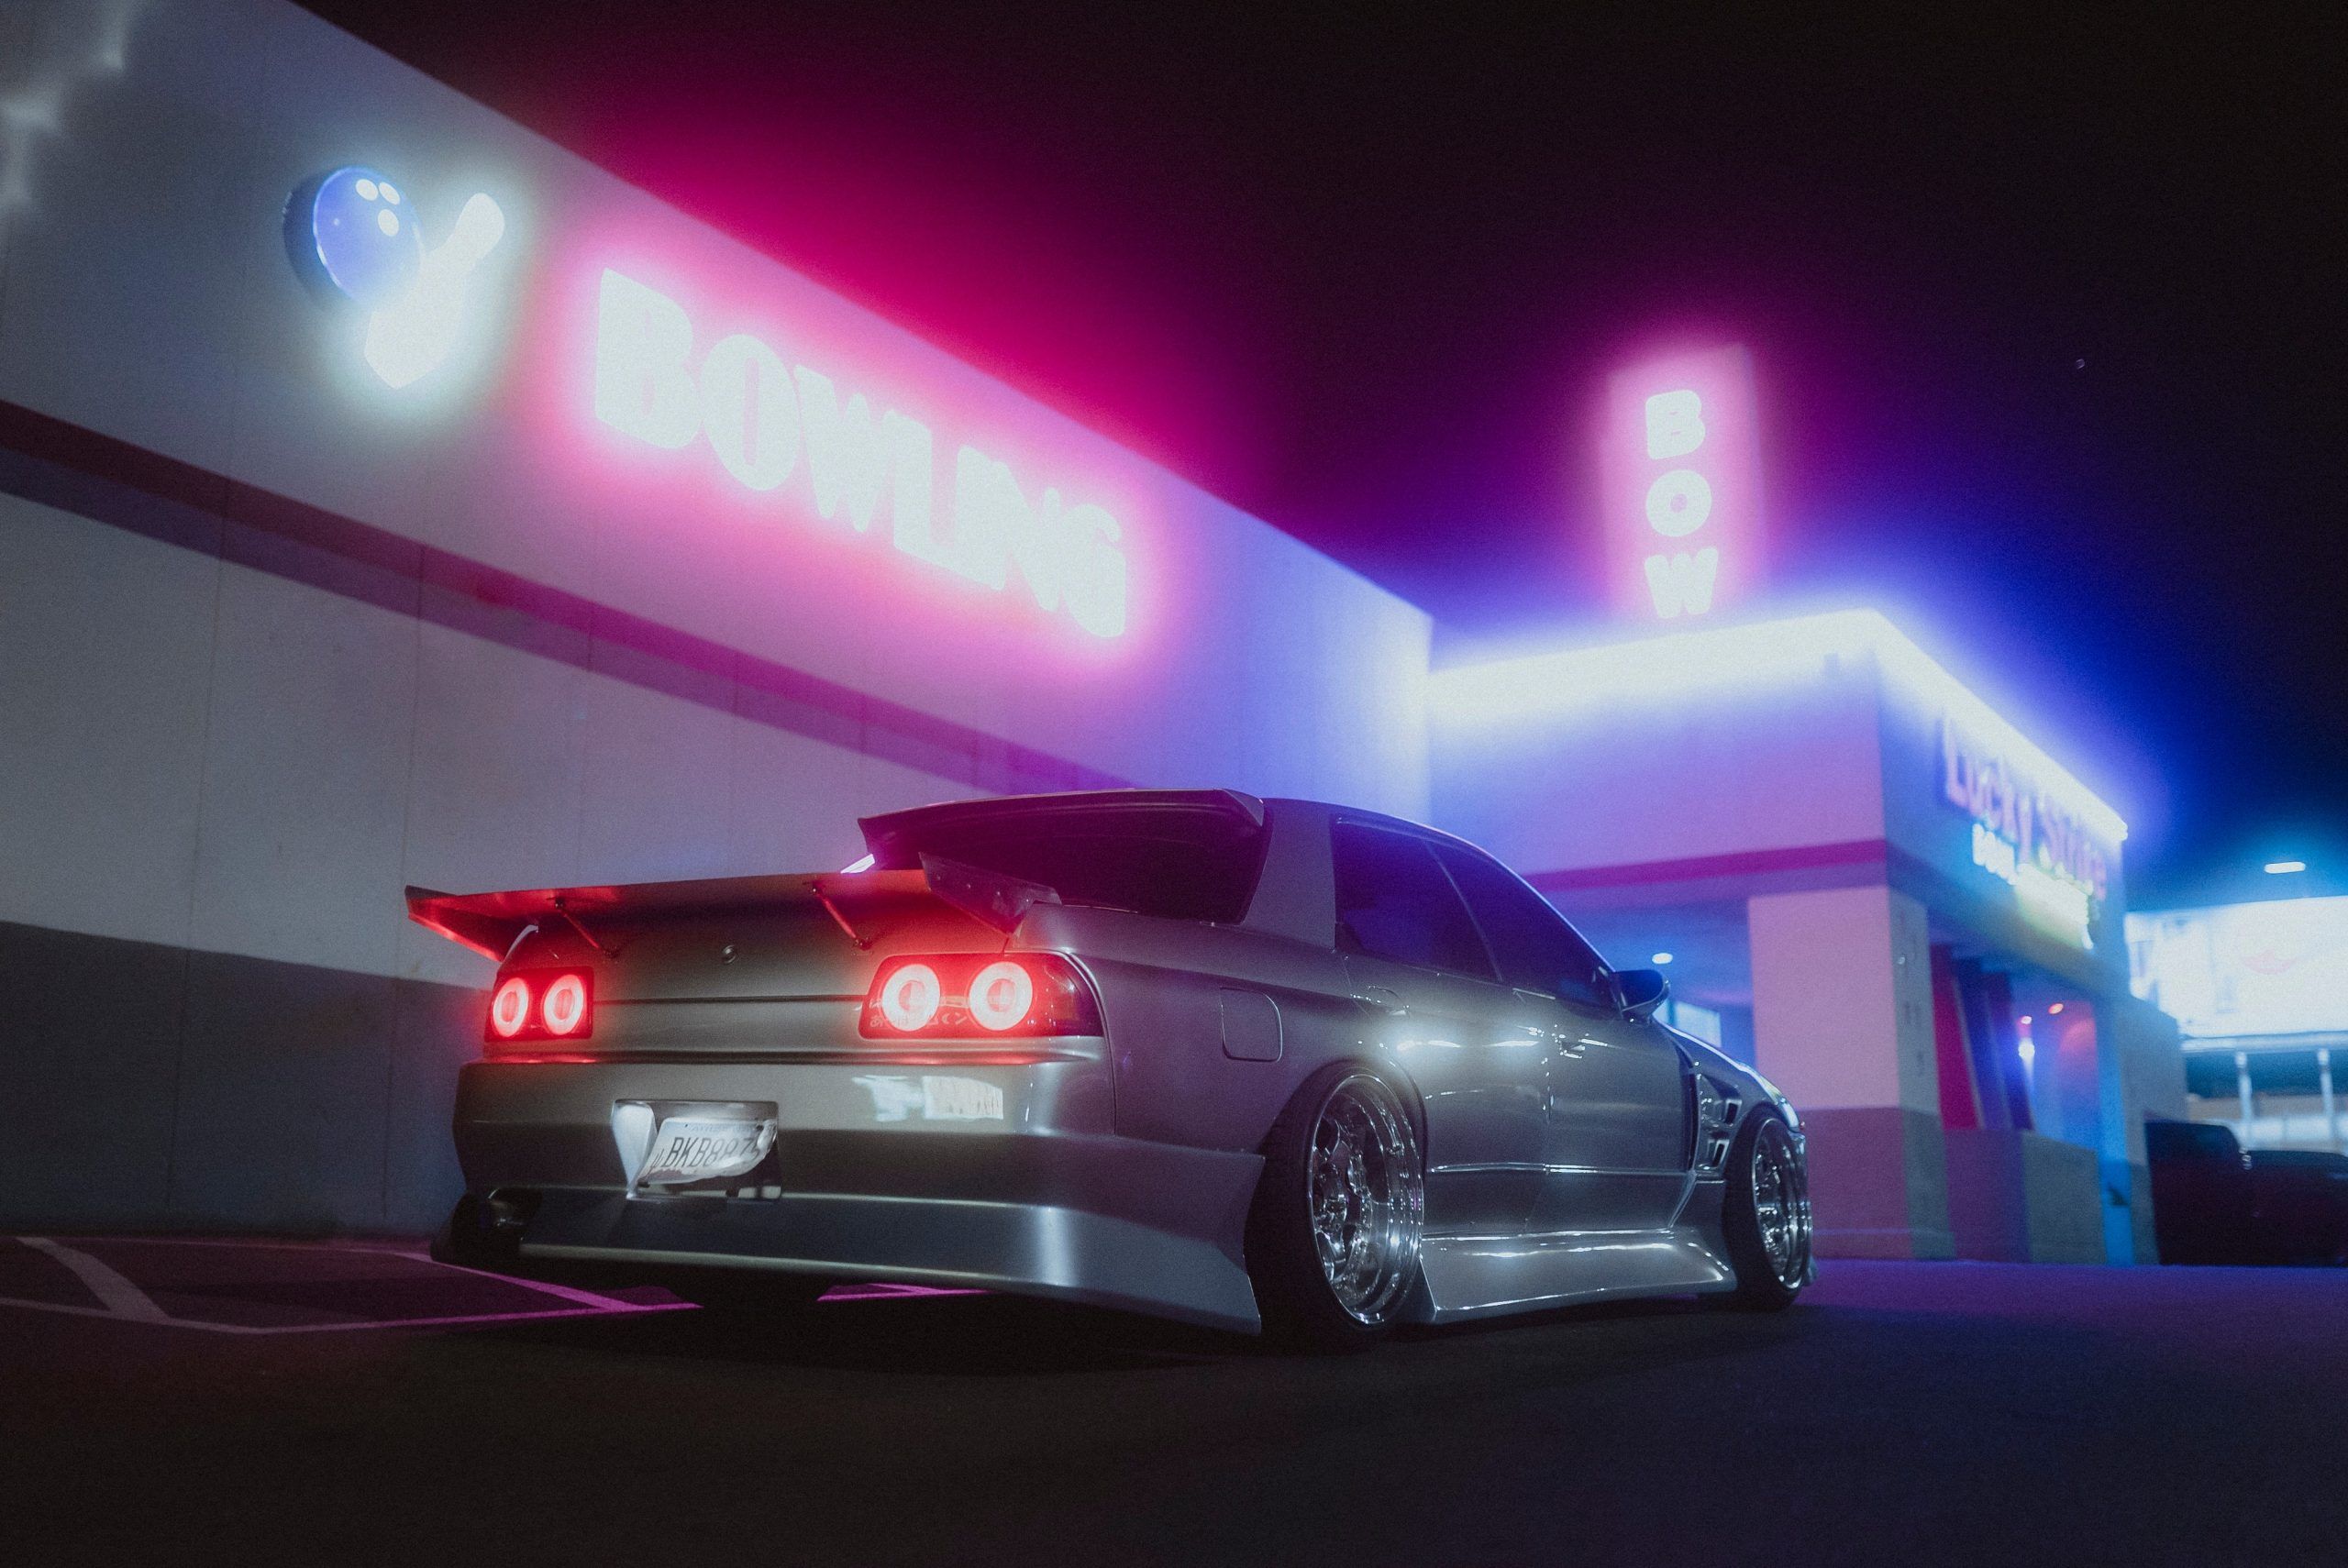 A grey car is parked outside a building with pink and blue neon lights. - Nissan Skyline